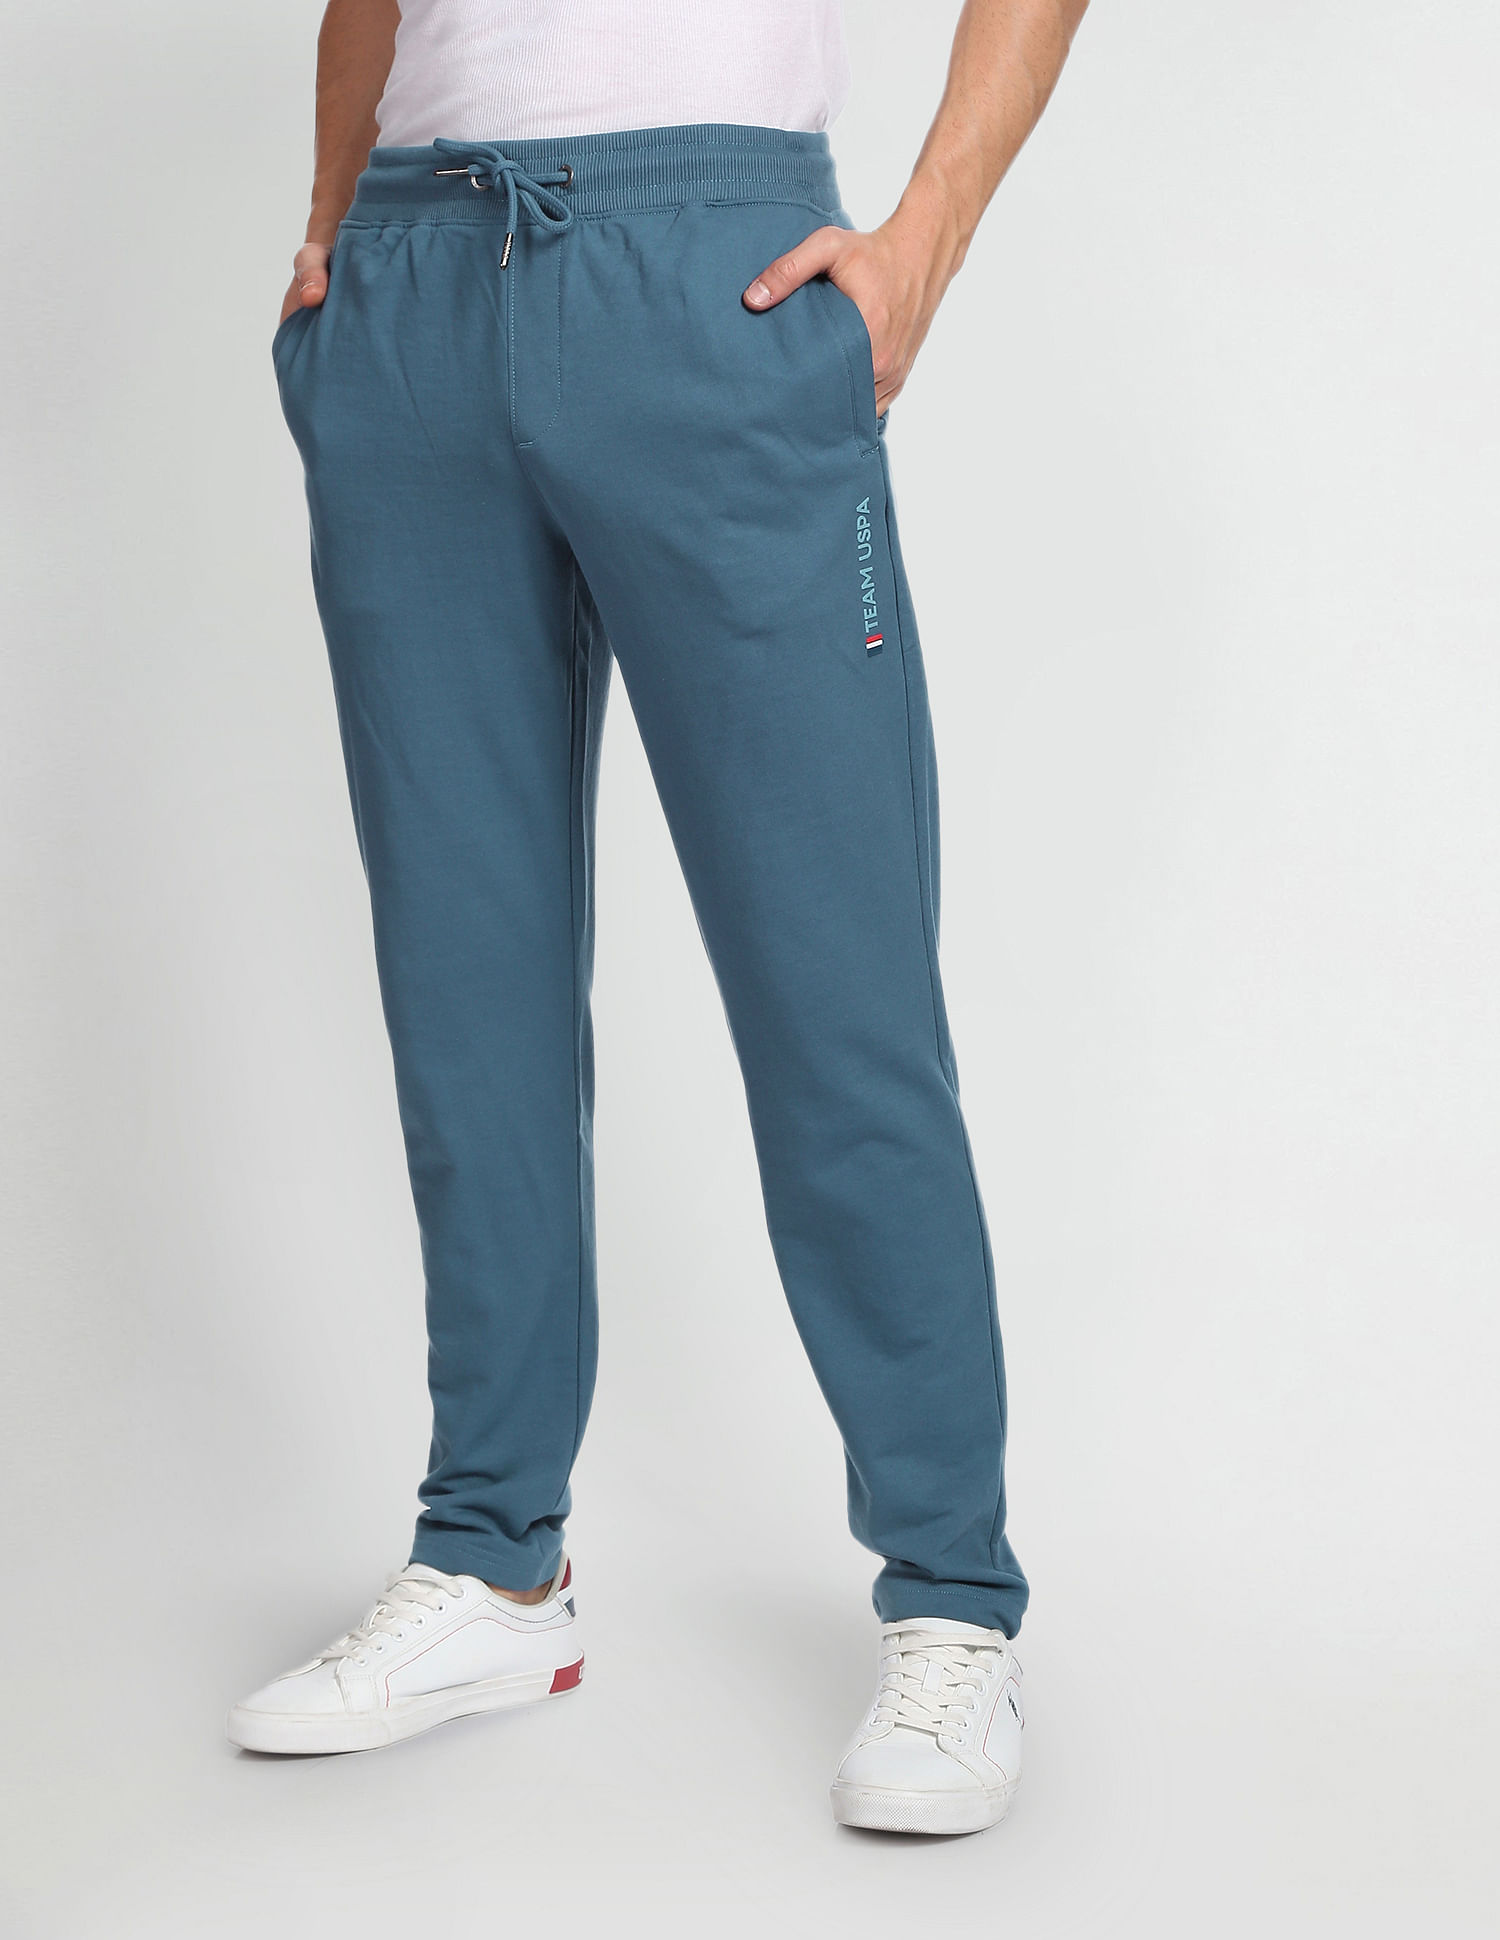 Designer Flower Print Denim Trouser Jeans For Men And Women Streetwear  Straight Casual Track Pants From Laidh, $37.34 | DHgate.Com